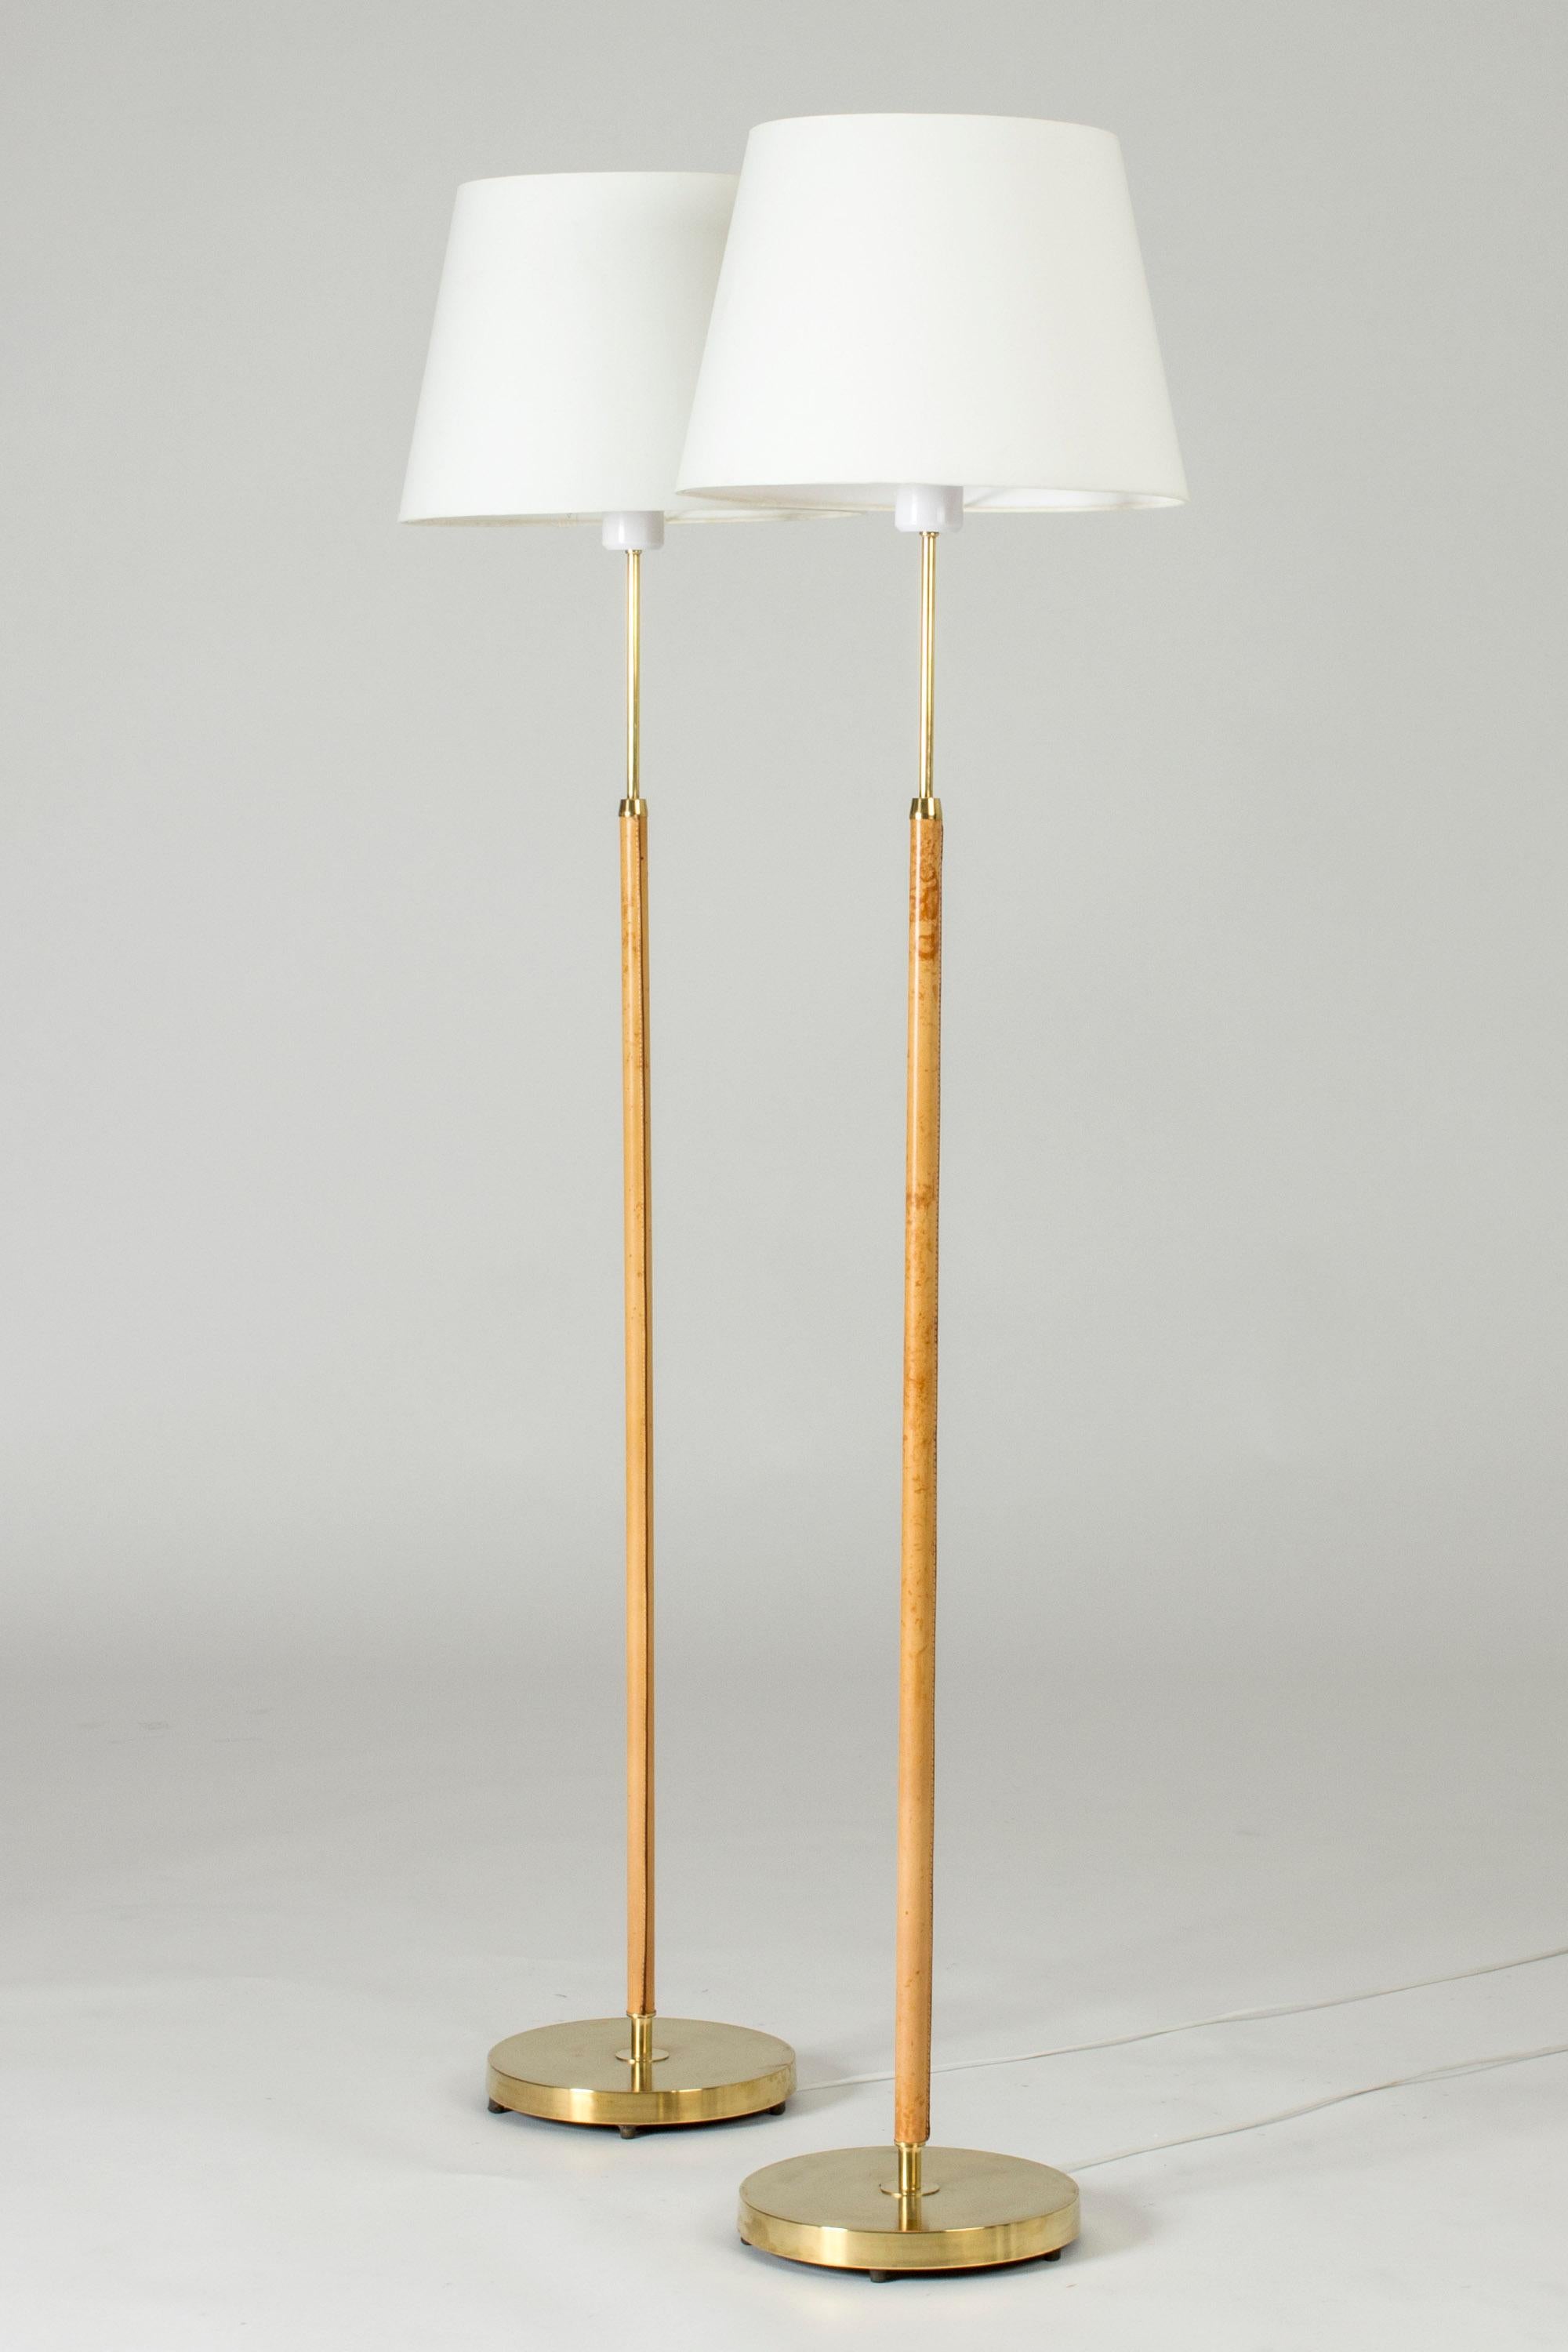 Pair of elegant floor lamps from Falkenbergs Belysning, made from brass. Sleek stems dressed with nicely patinated nude leather, decorative white seams.